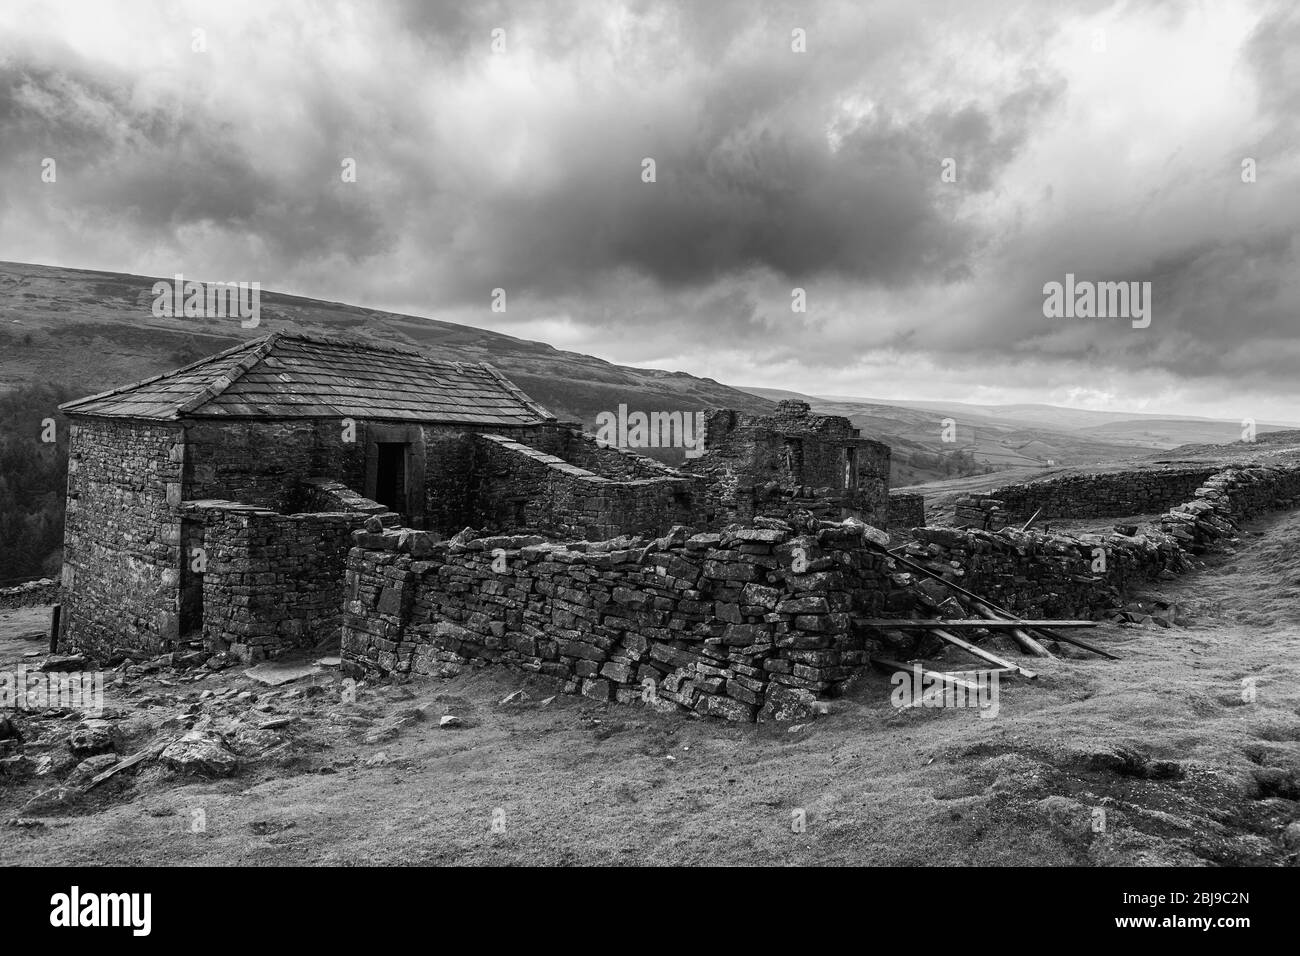 The ruins of Crackpot Halll near Keld, Upper Swaledale, North Yorkshire, England, UK.  Black and white version Stock Photo